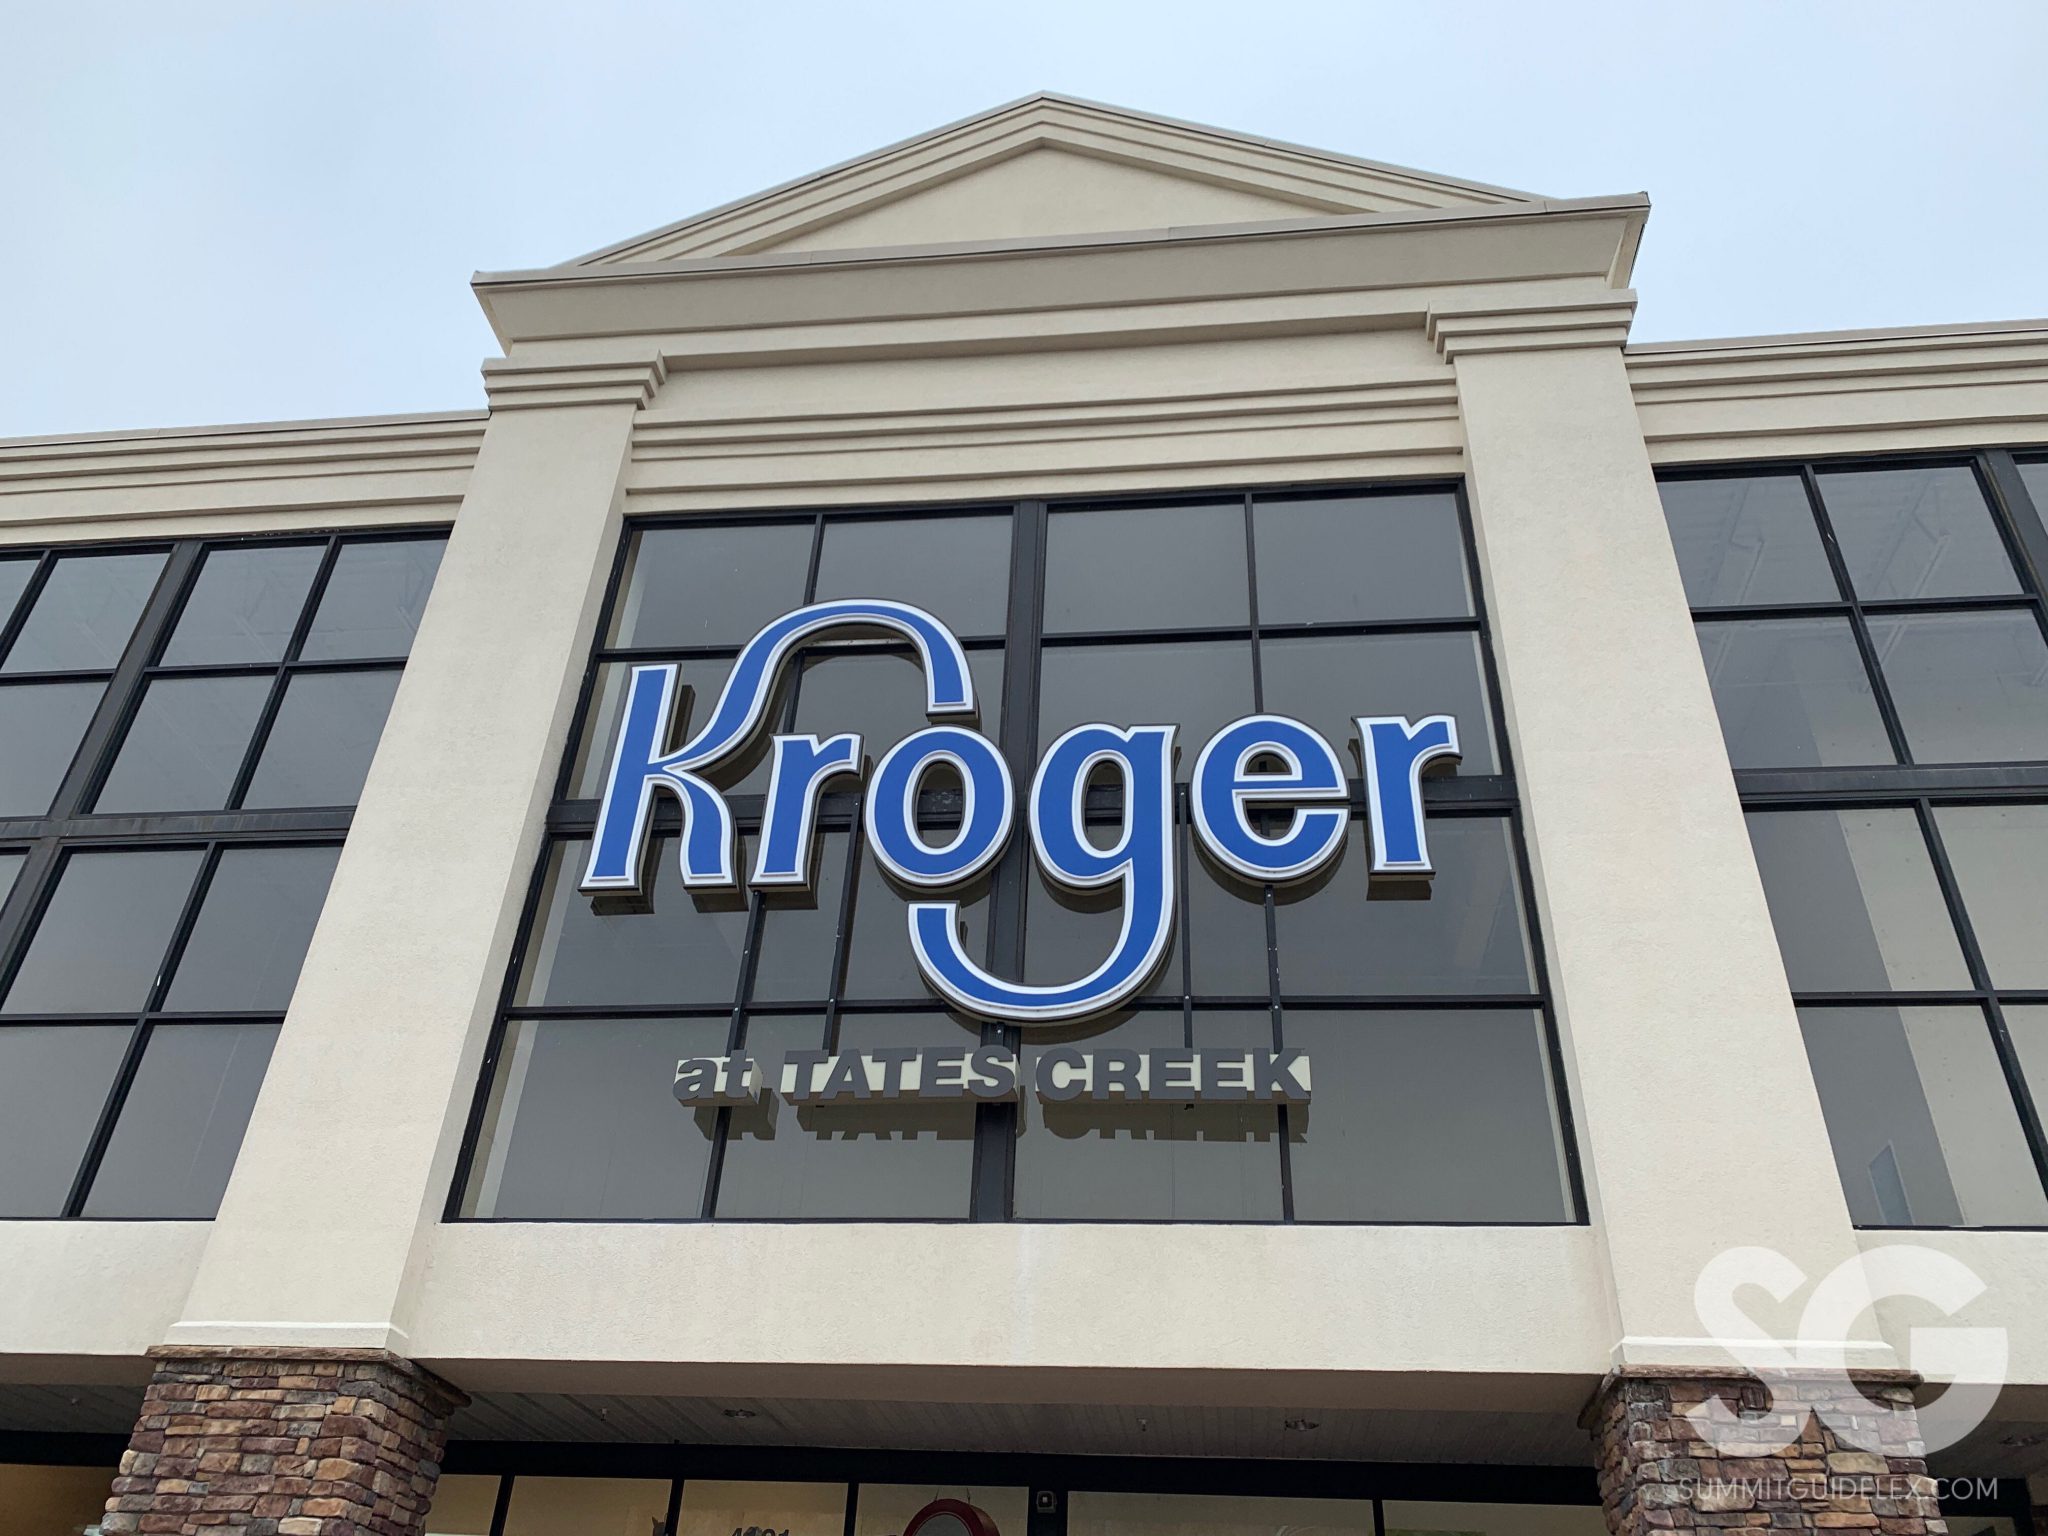 Kroger stores throughout Lexington adjust hours during COVID19